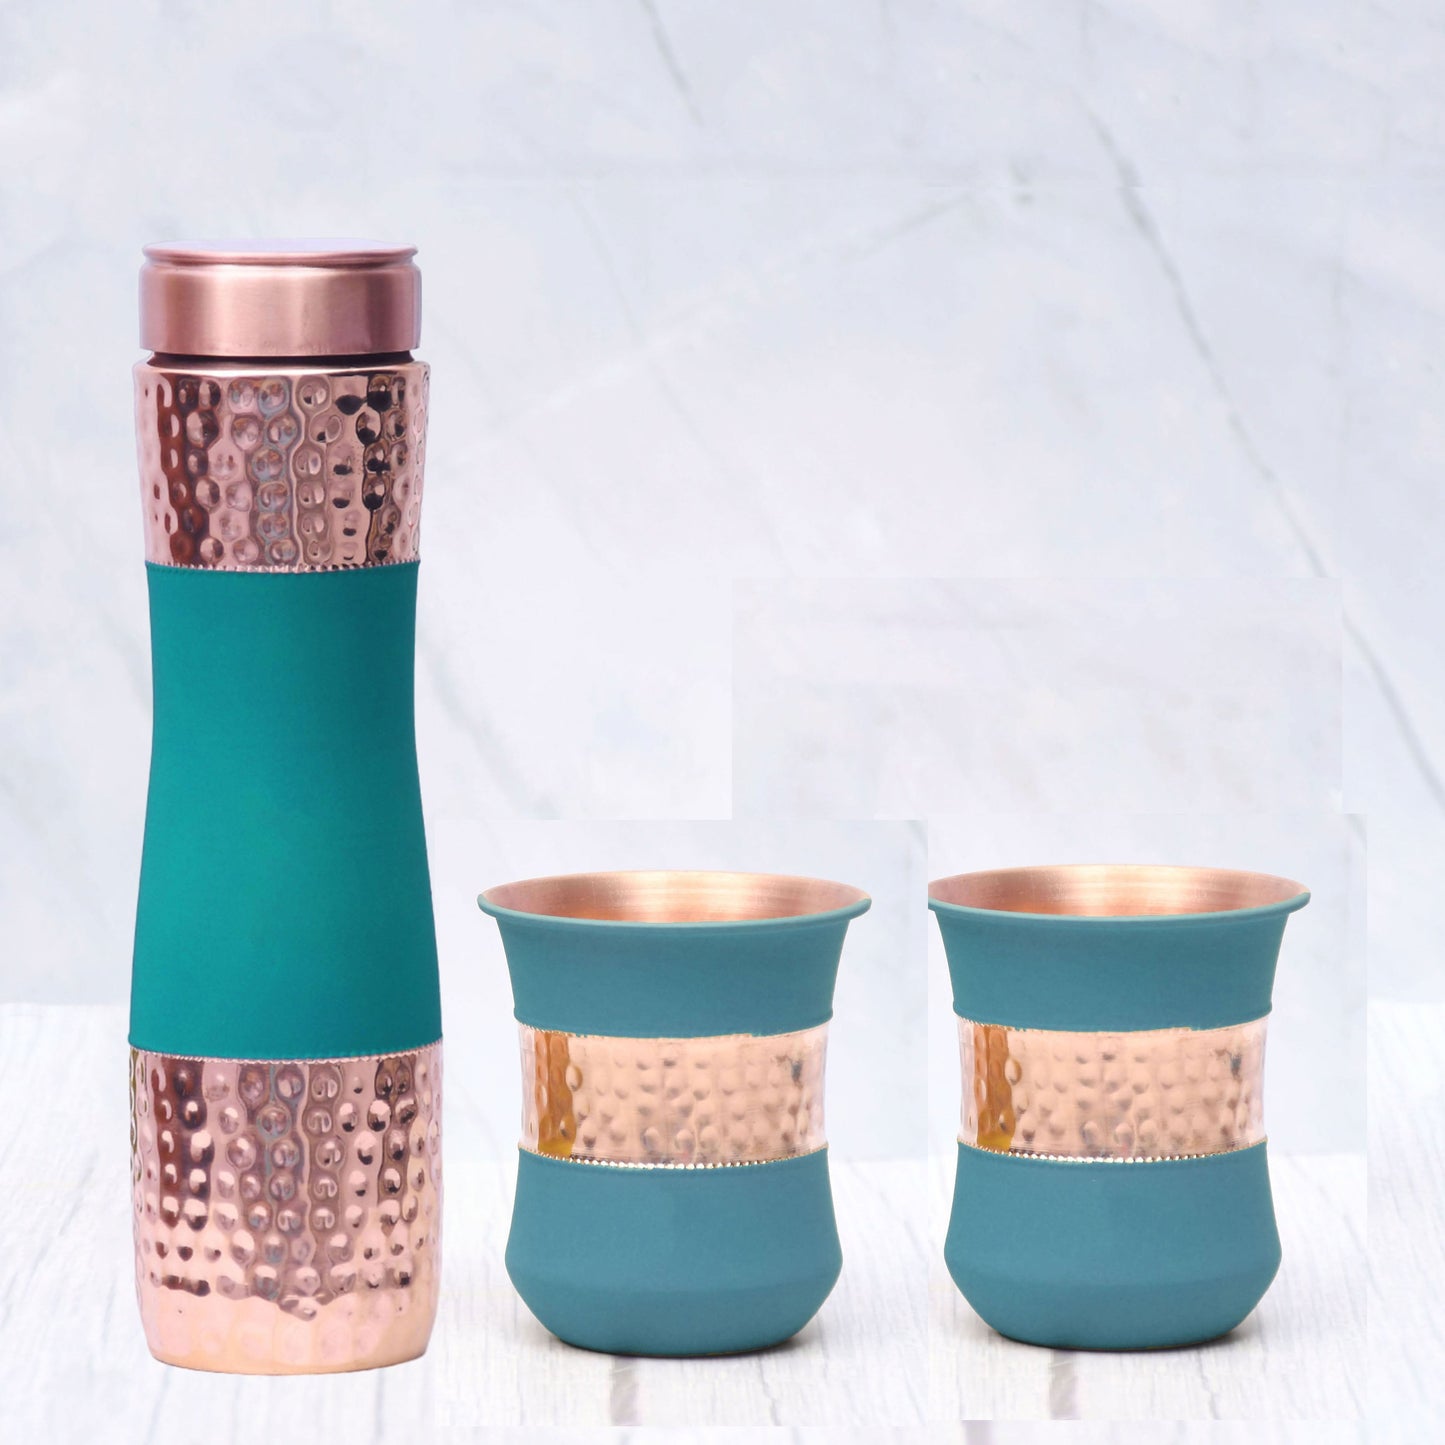 SAMA Homes - pure copper water bottle silk green half hammered with 2 dholak glasses set of 3